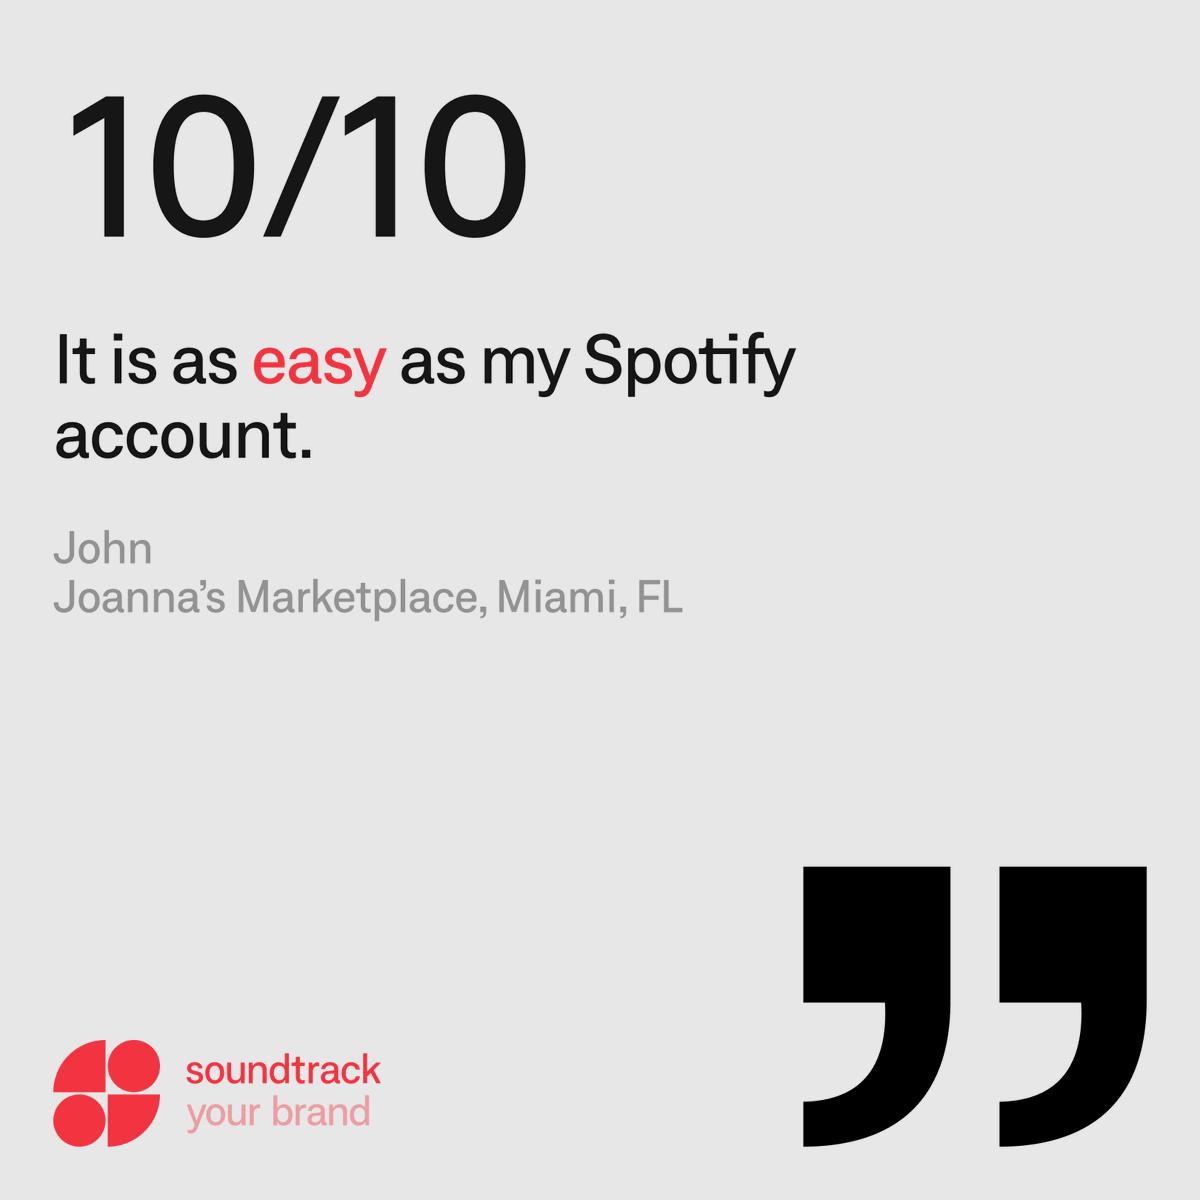 An intuitive interface, giving you control over your musical brand experience. 🎵 No need to sacrifice usability to be business legal. Thank you, Joanna’s Marketplace, for sharing your Soundtrack experience. #MusicforBusiness #SoundtrackYourBrand